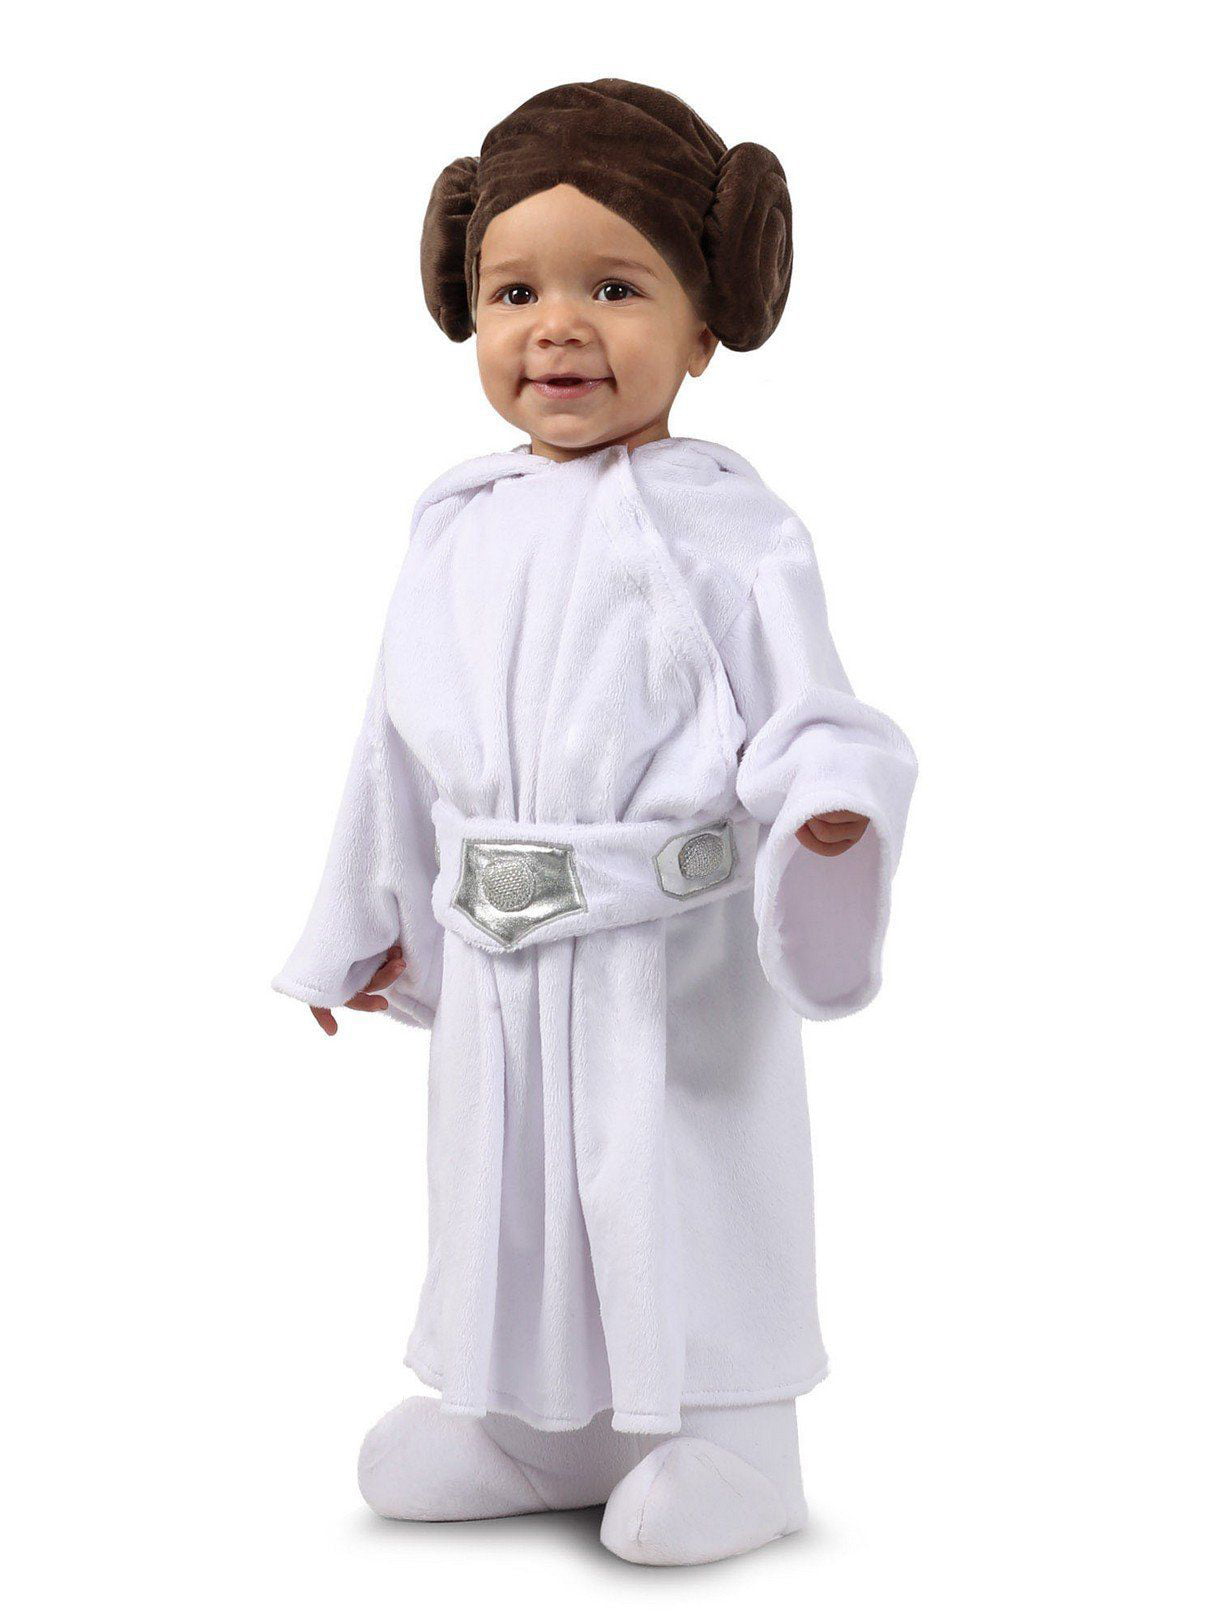 Disney Star Wars Princess Leia Costume For Babies, White Tunic Top And ...